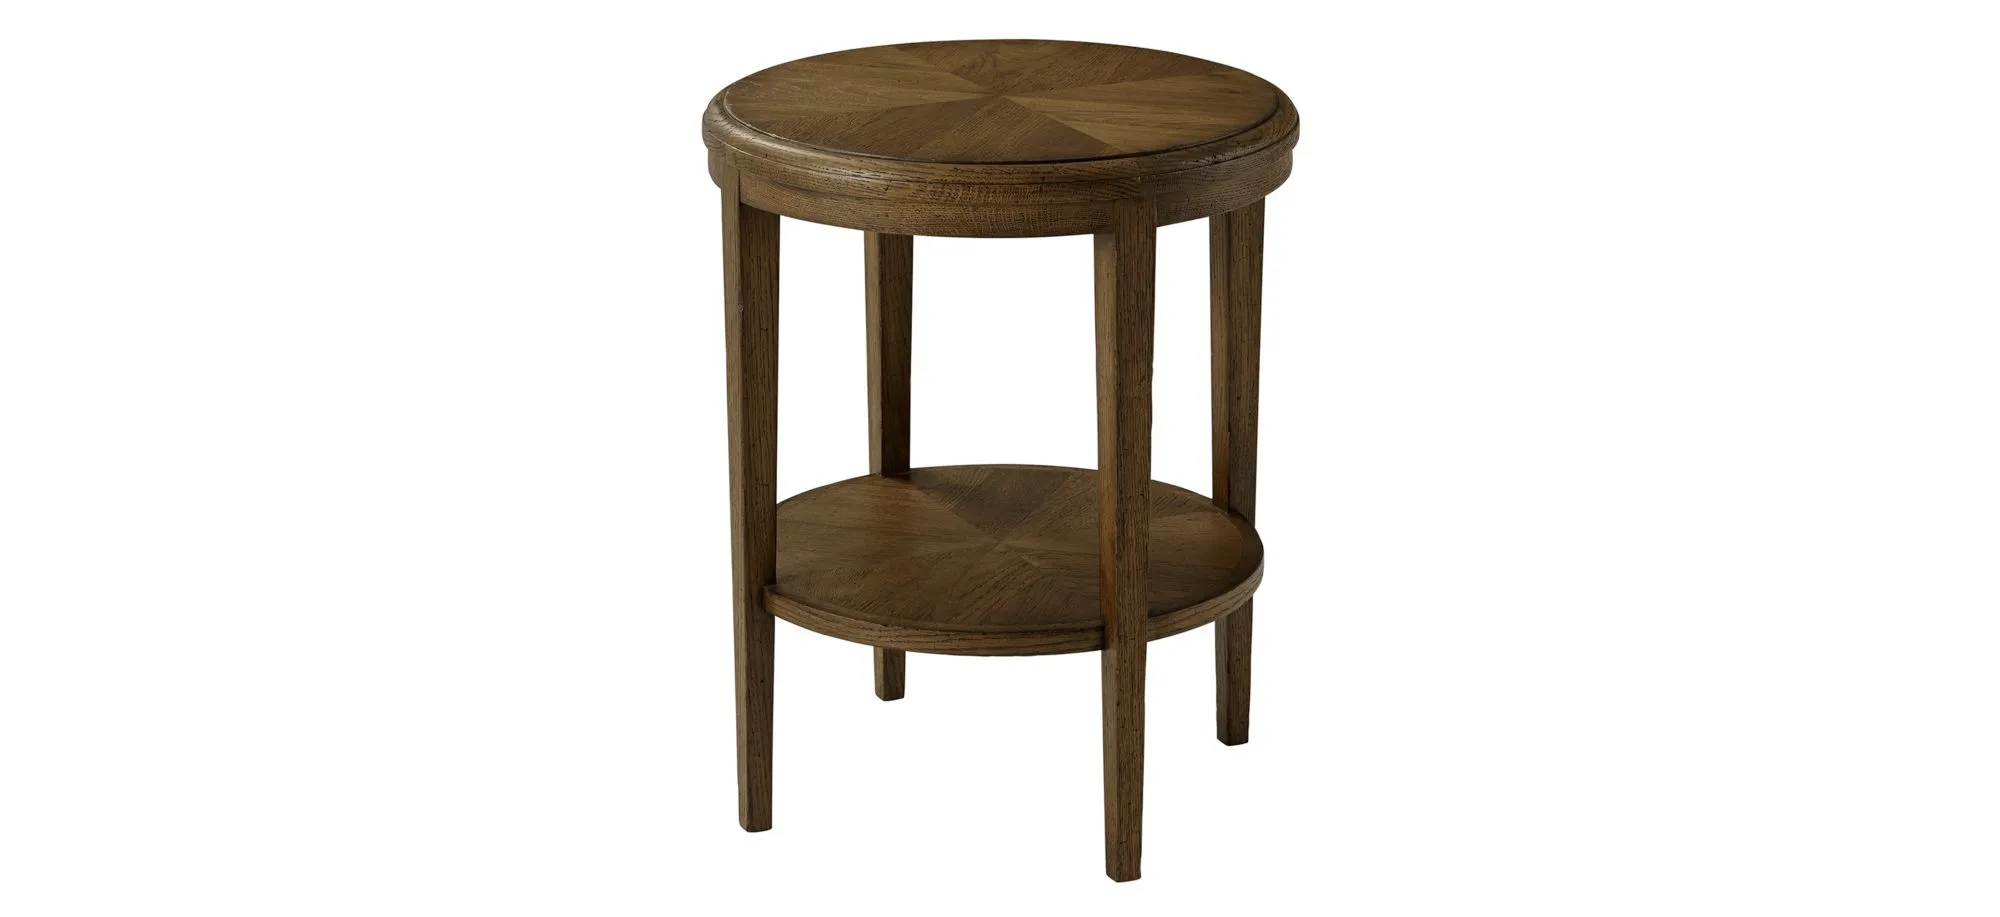 Nova Two Tiered Round Side Table in Dusk by Theodore Alexander